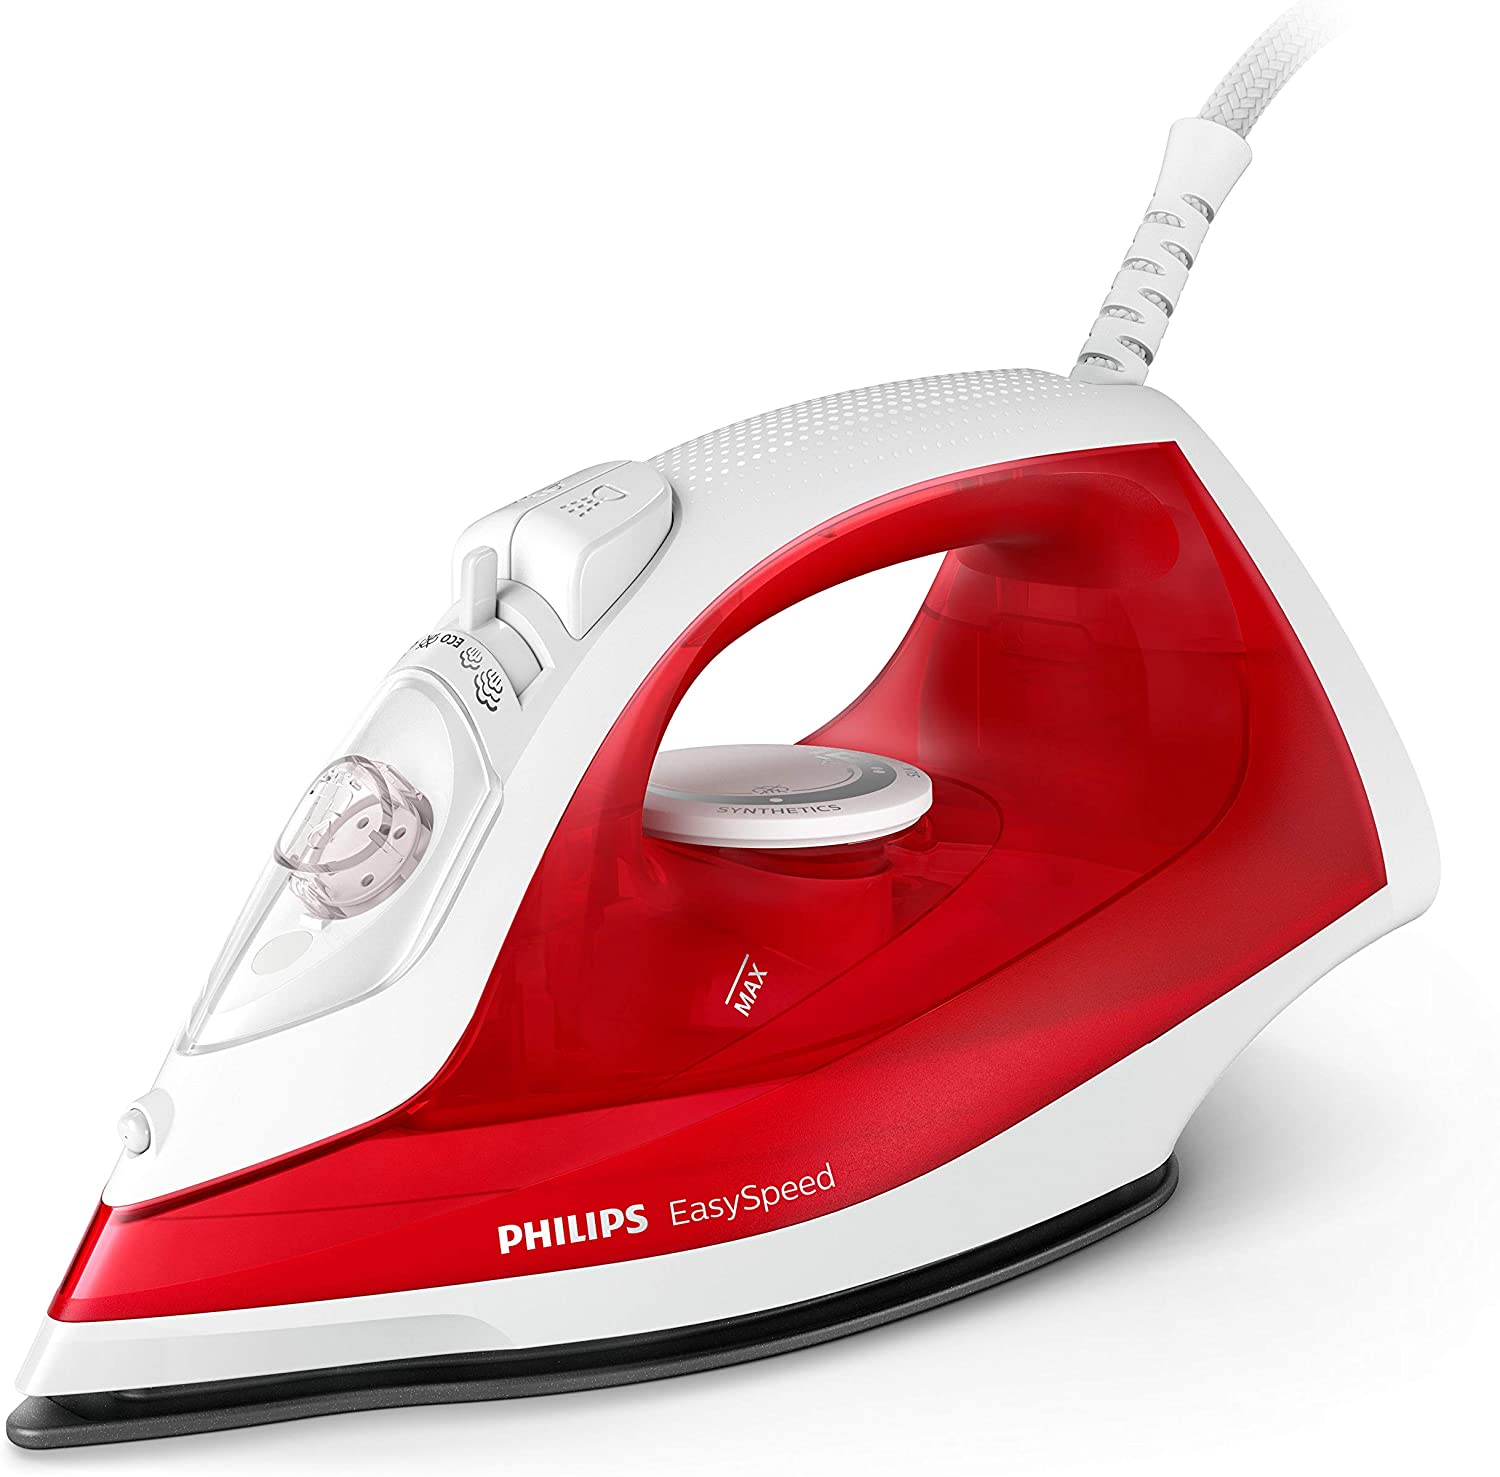 Philips Easy Speed iron Dry & Steam - GC1742 | reliable performance | lightweight | variable steam settings | safety features | stylish | even heat distribution | Halabh.com